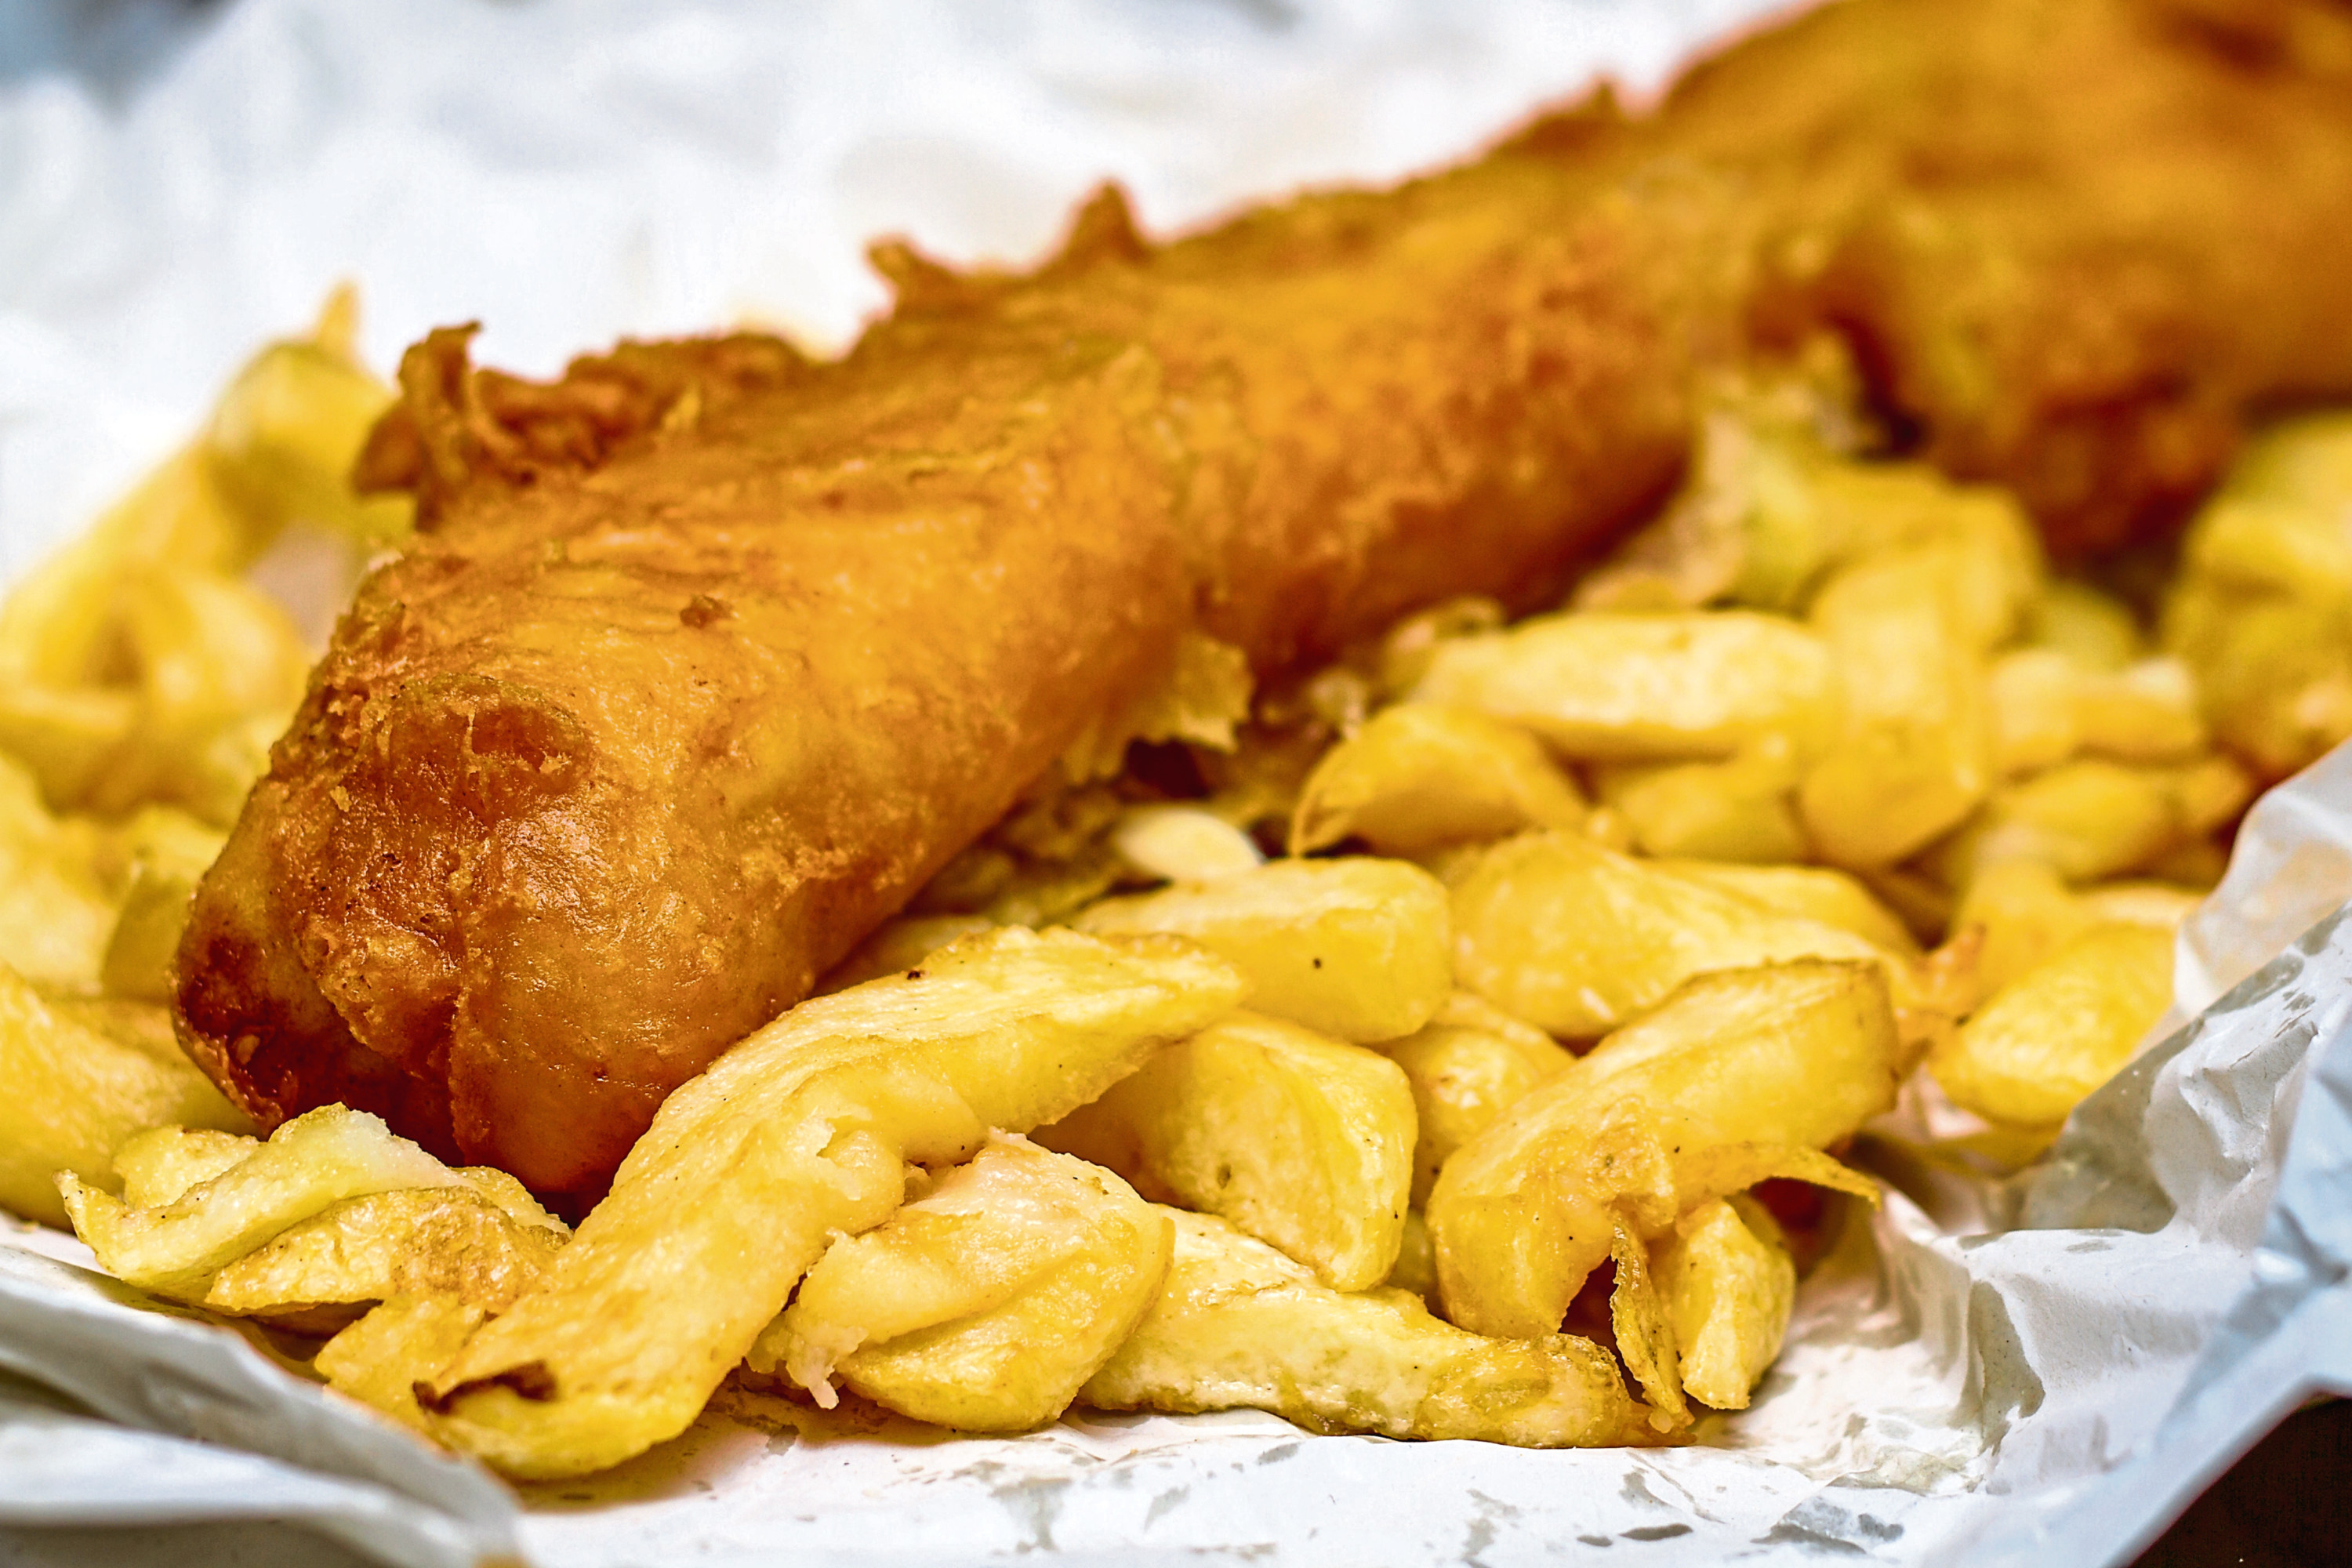 Takeaway customers are embracing smaller portions of fish and chips